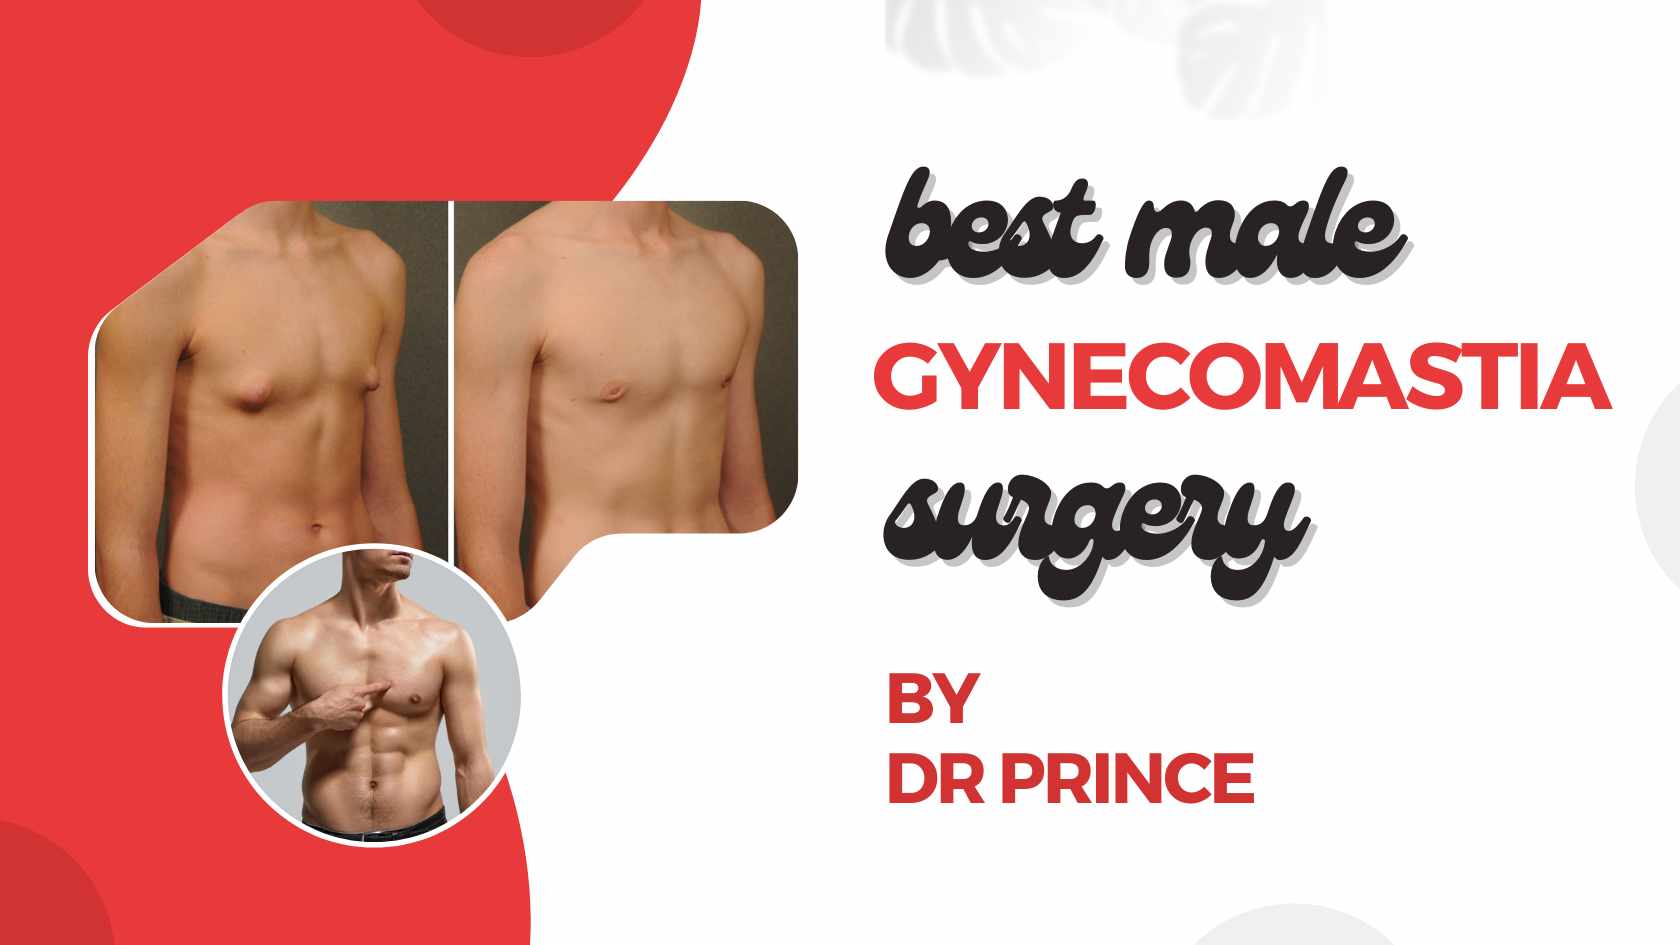 Illustration of a male figure with a before and after depiction of gynecomastia surgery.